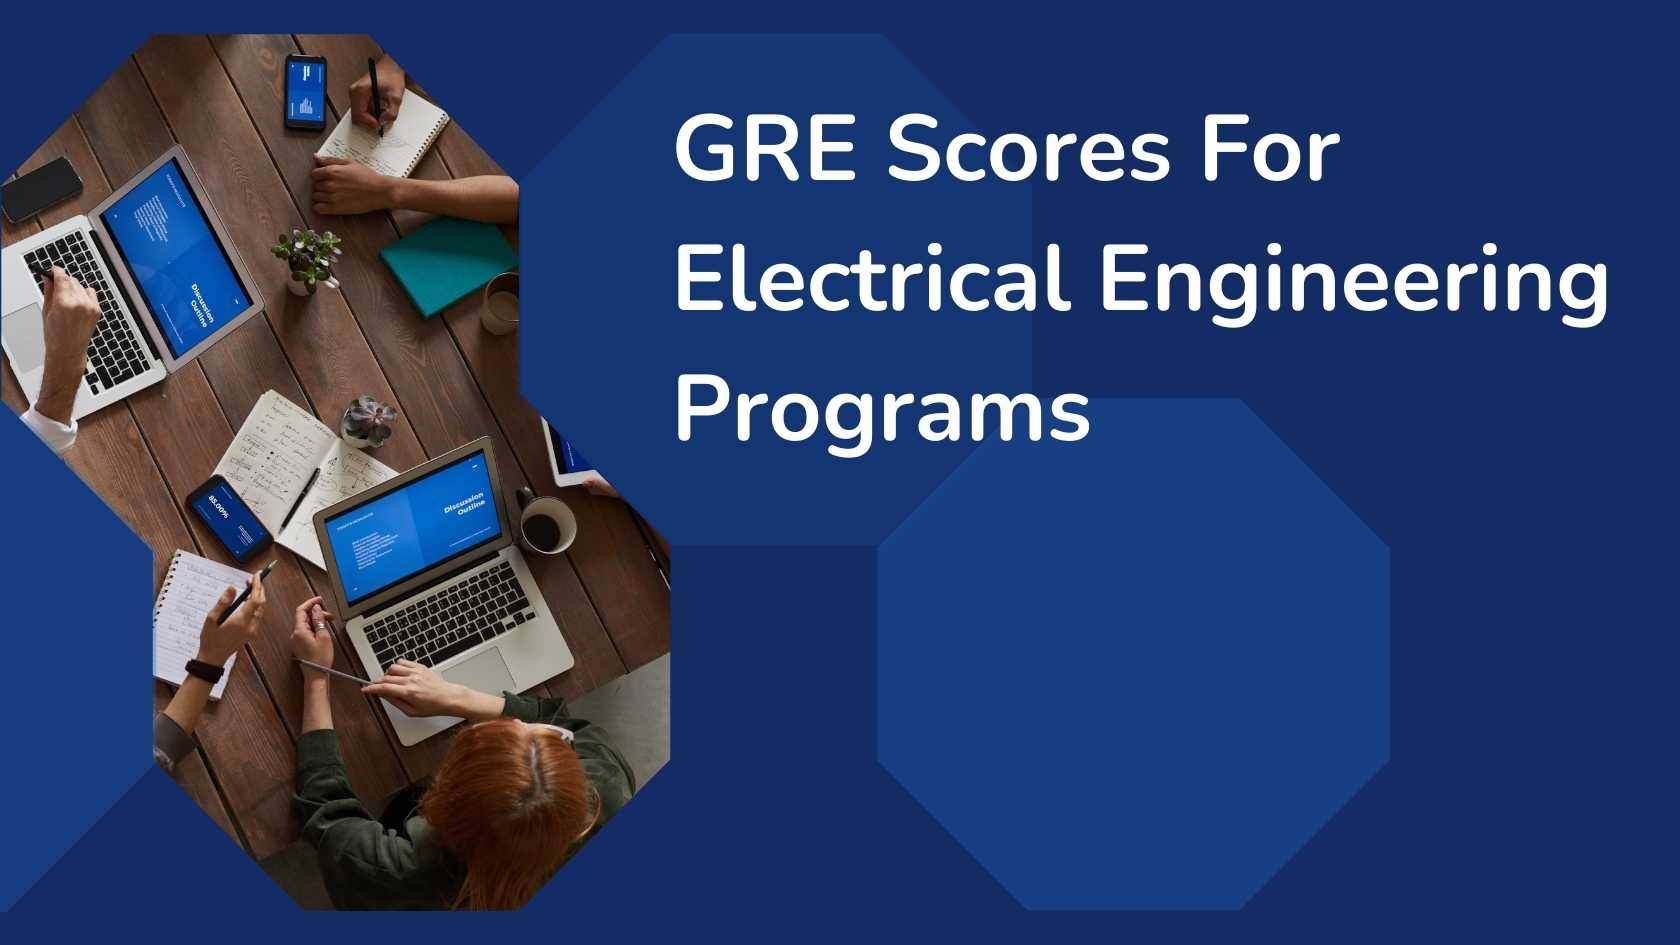 GRE Scores for Electrical Engineering Programs